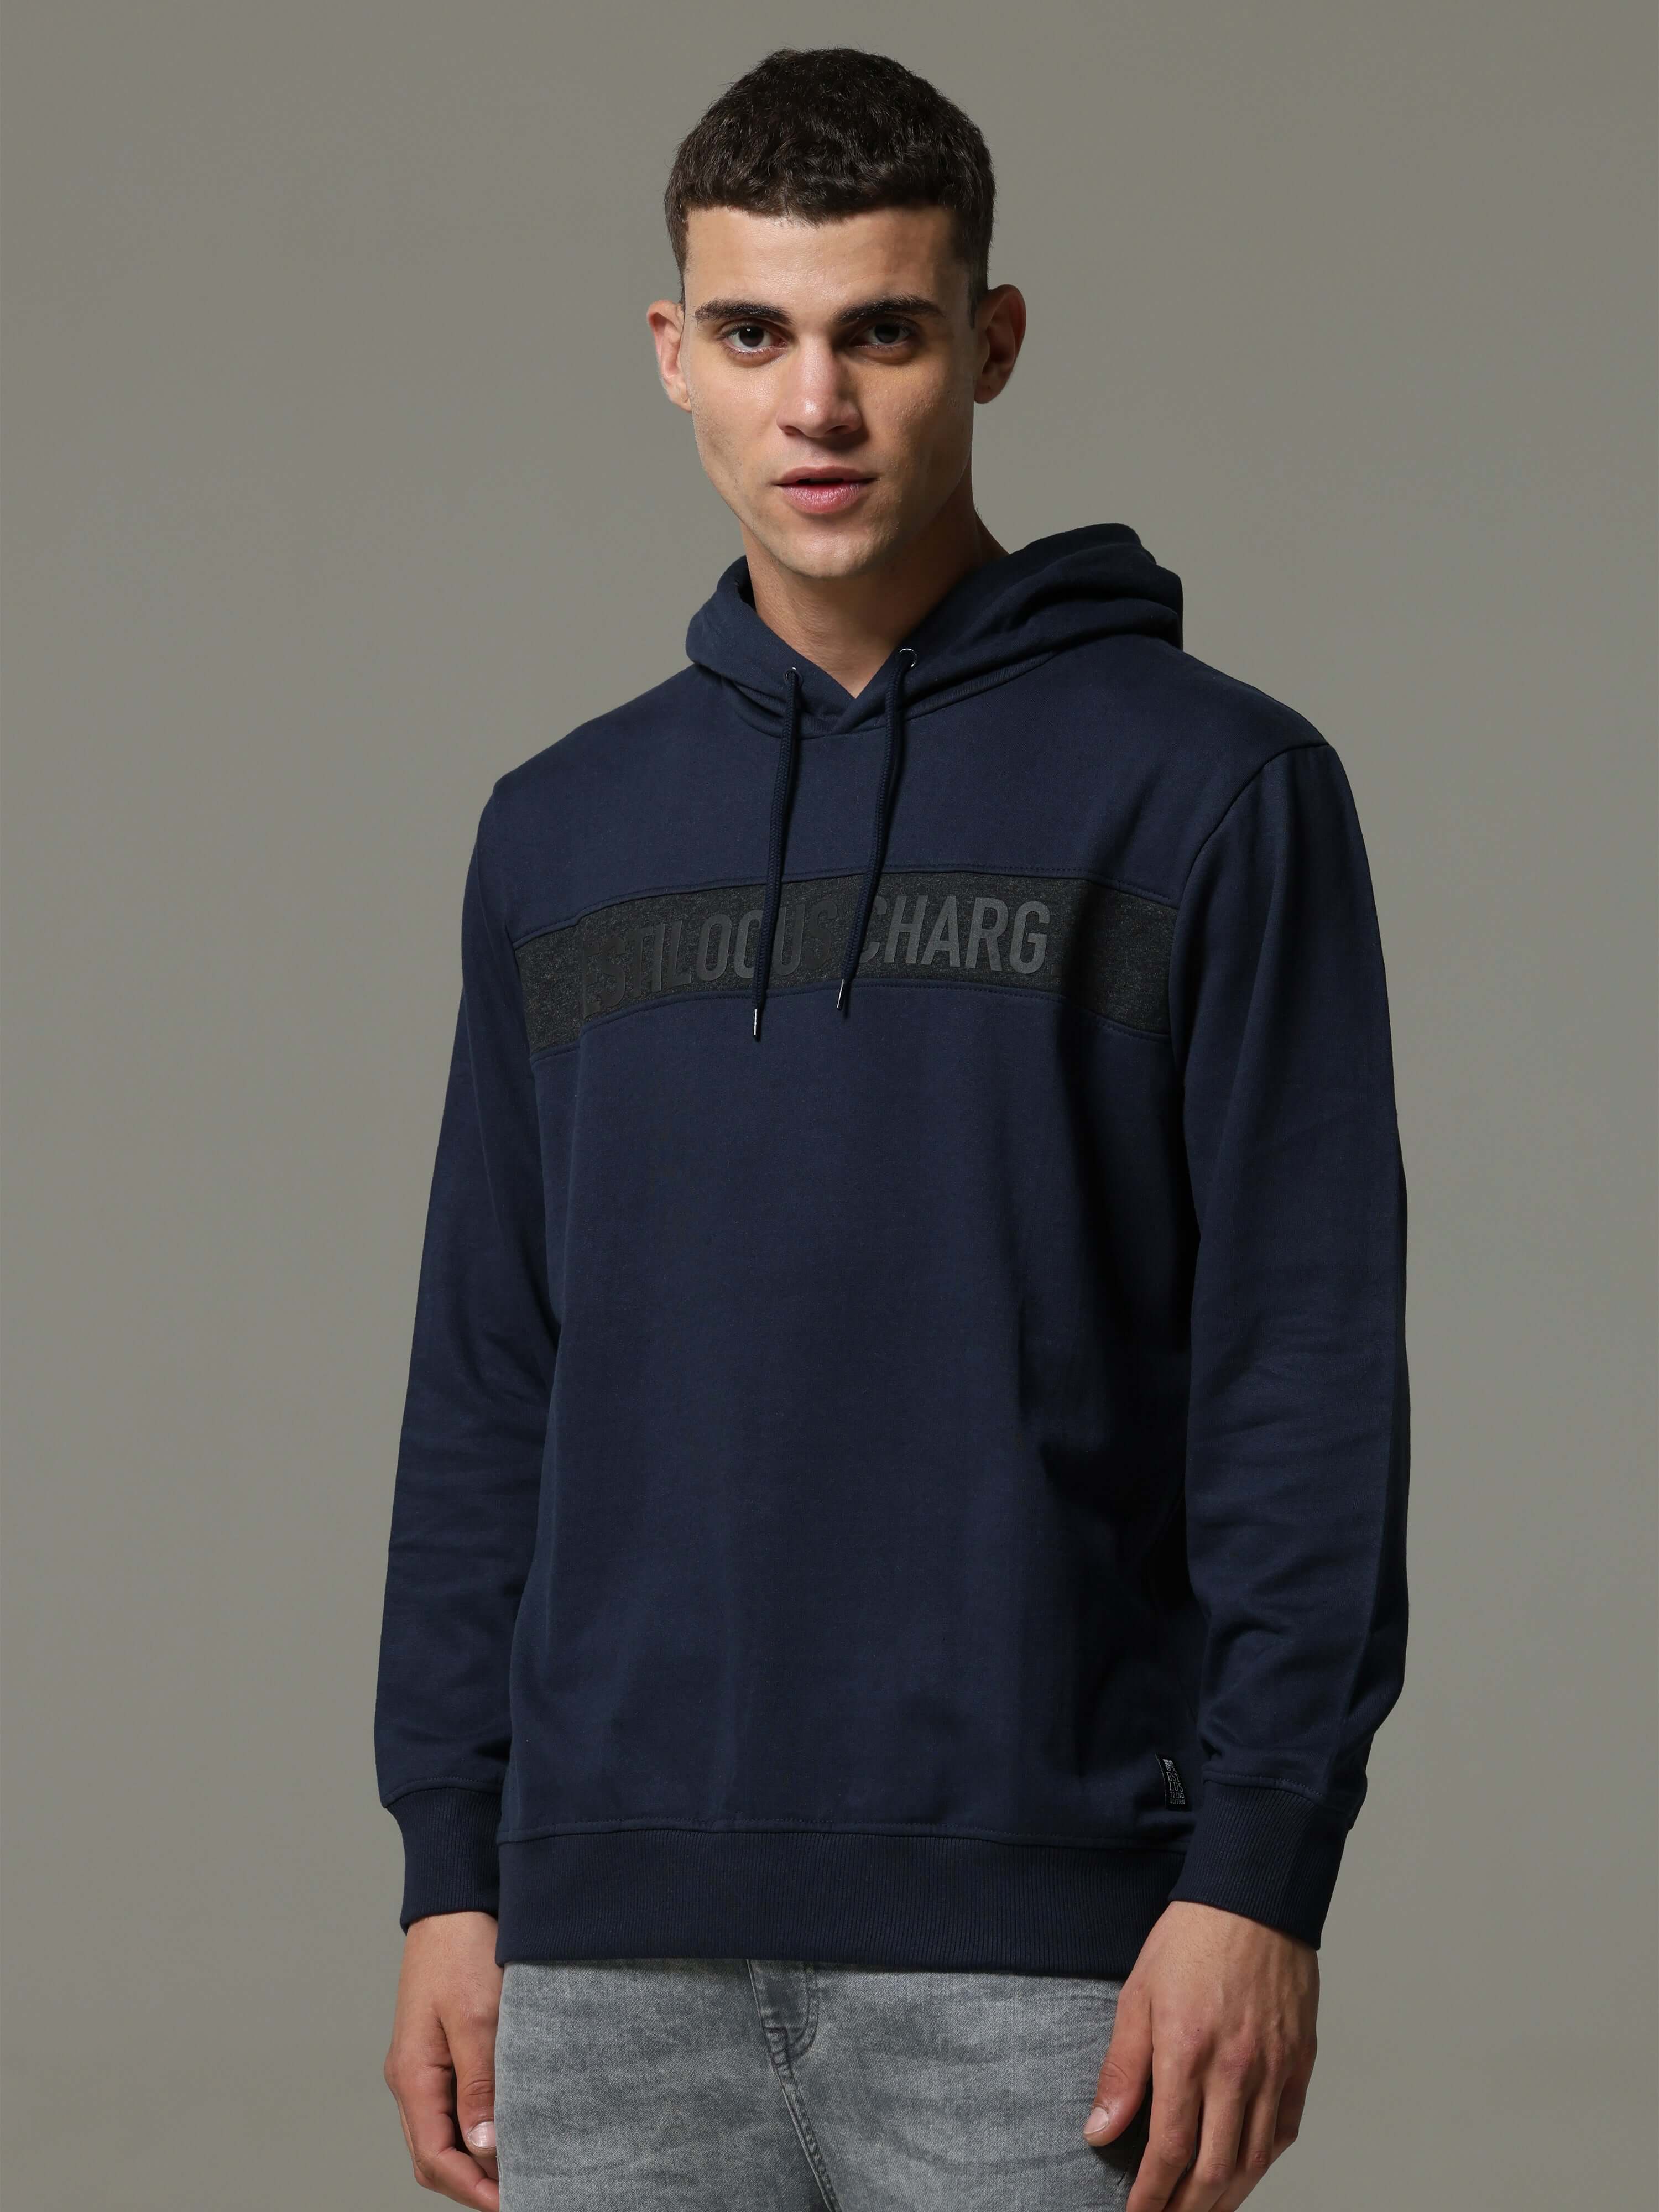 Navy Charg Hoodie shop online at Estilocus. • Crew neck with an attached hood • Adjustable hood with drawcord •A regular fit with long sleeves •Zipper and pocketless • Dress it up with a pair of Denim or Joggers Fit : Comfort fit Size : The model is weari